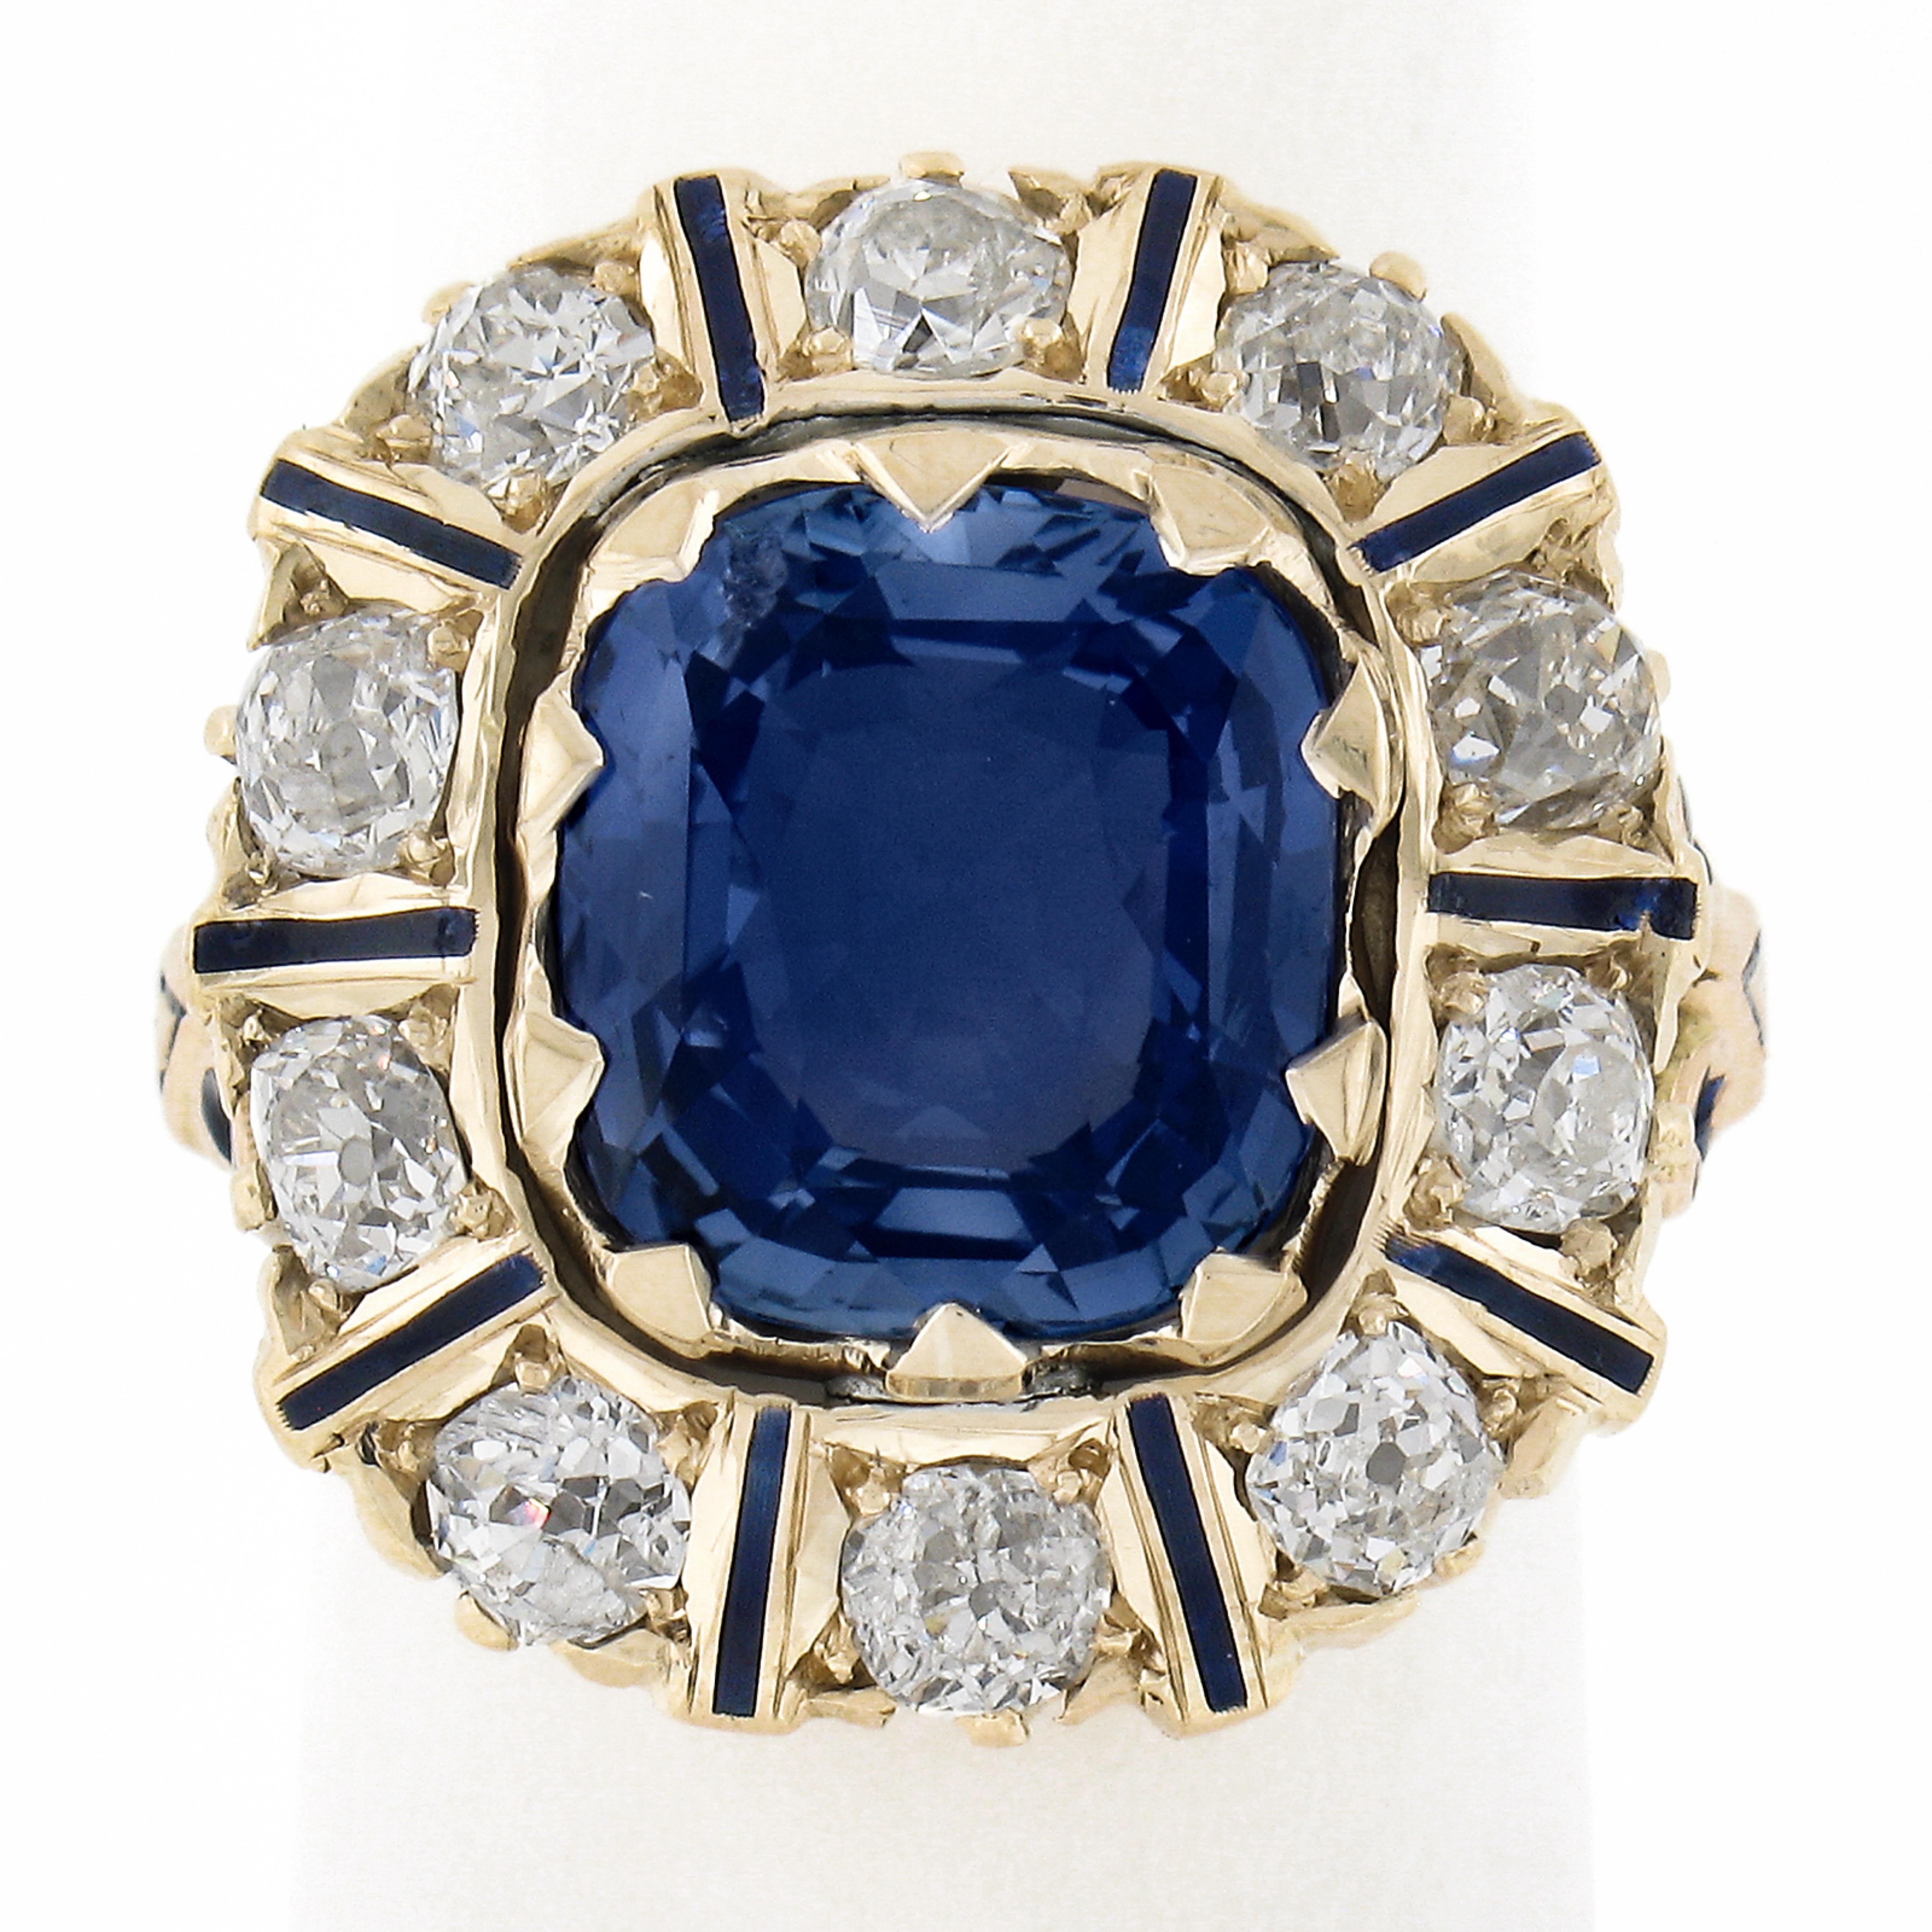 This incredible sapphire and diamond vintage cocktail ring is crafted in solid 14k gold and features a breathtaking and truly fine quality cushion brilliant sapphire which has been certified by GIA. Its exceptional color is all natural as the stone